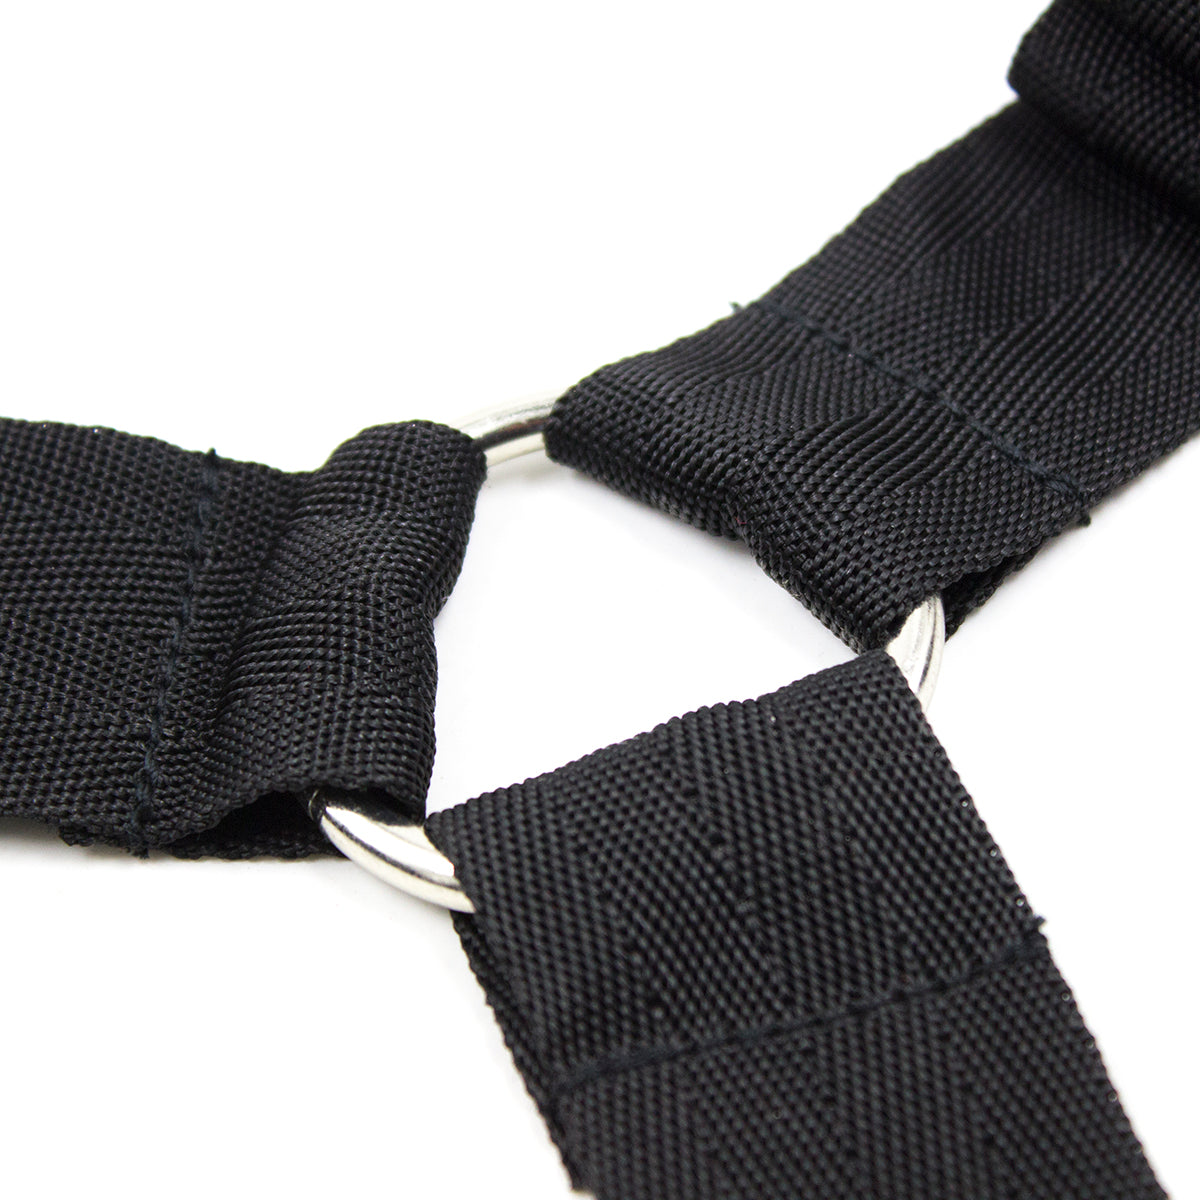 Wrist and Ancle Velcro Bondage - Bondage Restraints Wrist and Ankle Cuffs and Bed Attaching Straps